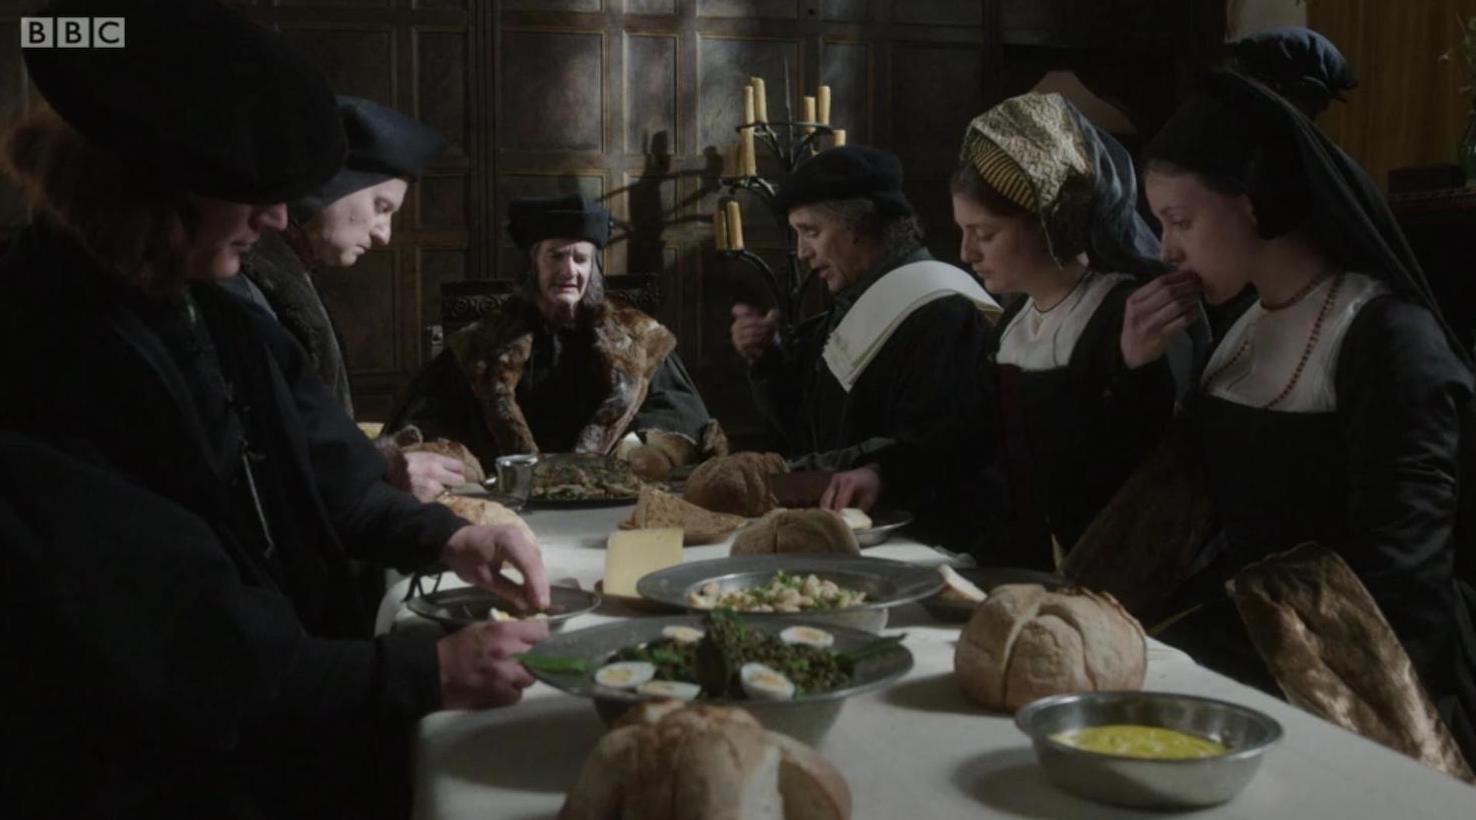 Picture shows: Thomas Cromwell (Mark Rylance) at dinner with Sir Thomas More (Anton Lesser) and his family at a wooden table by candlelight.